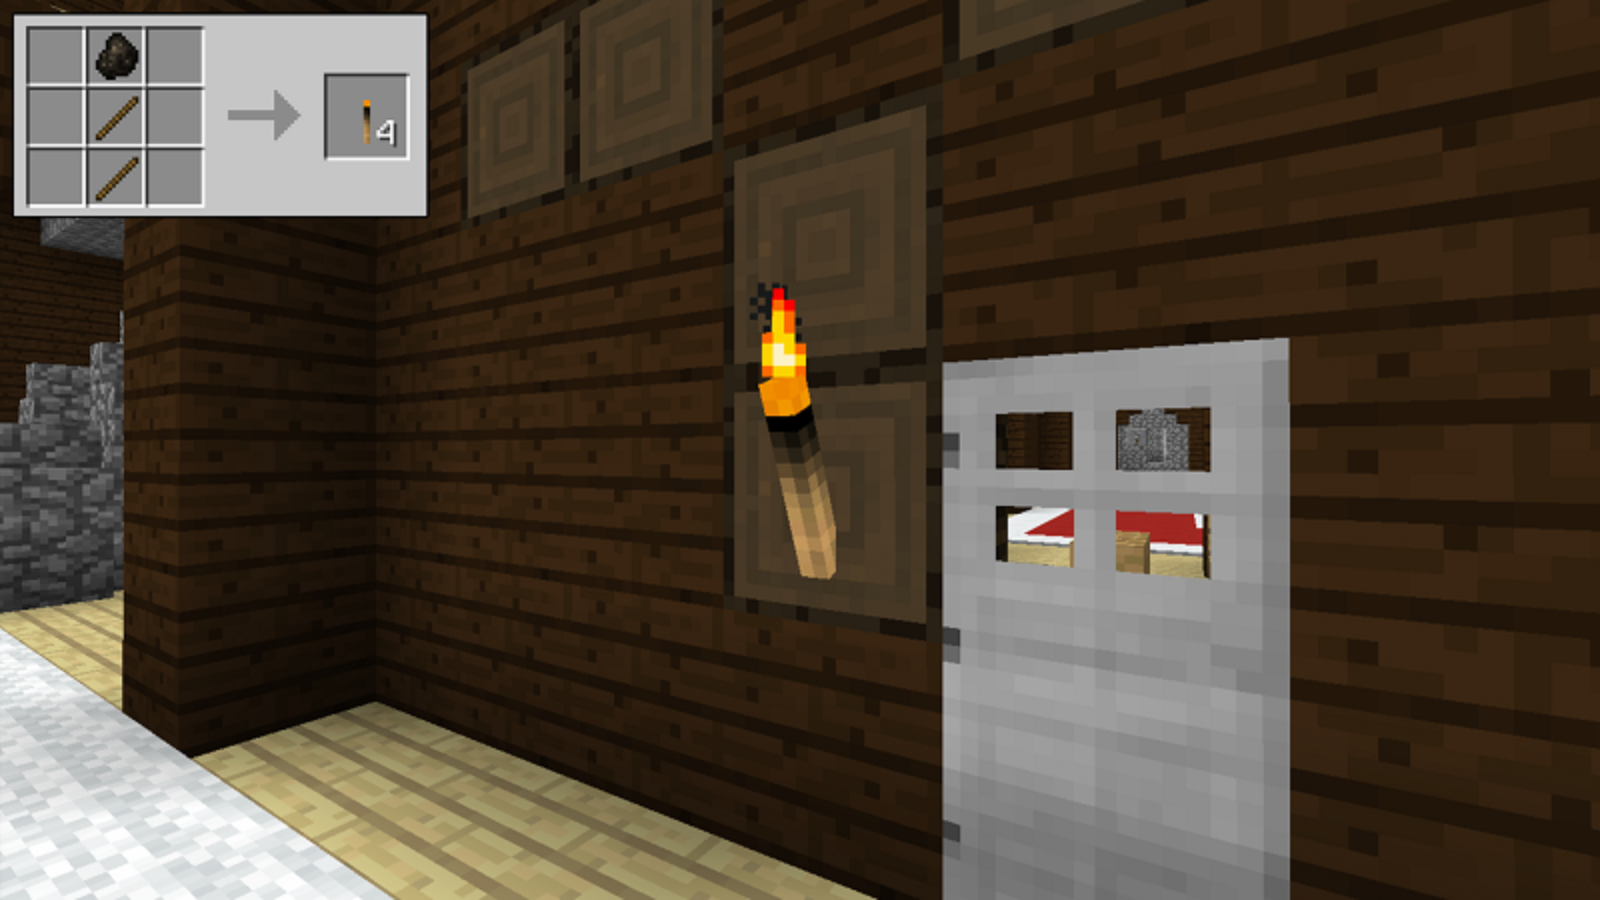 How to make a torch in minecraft - IDPHub